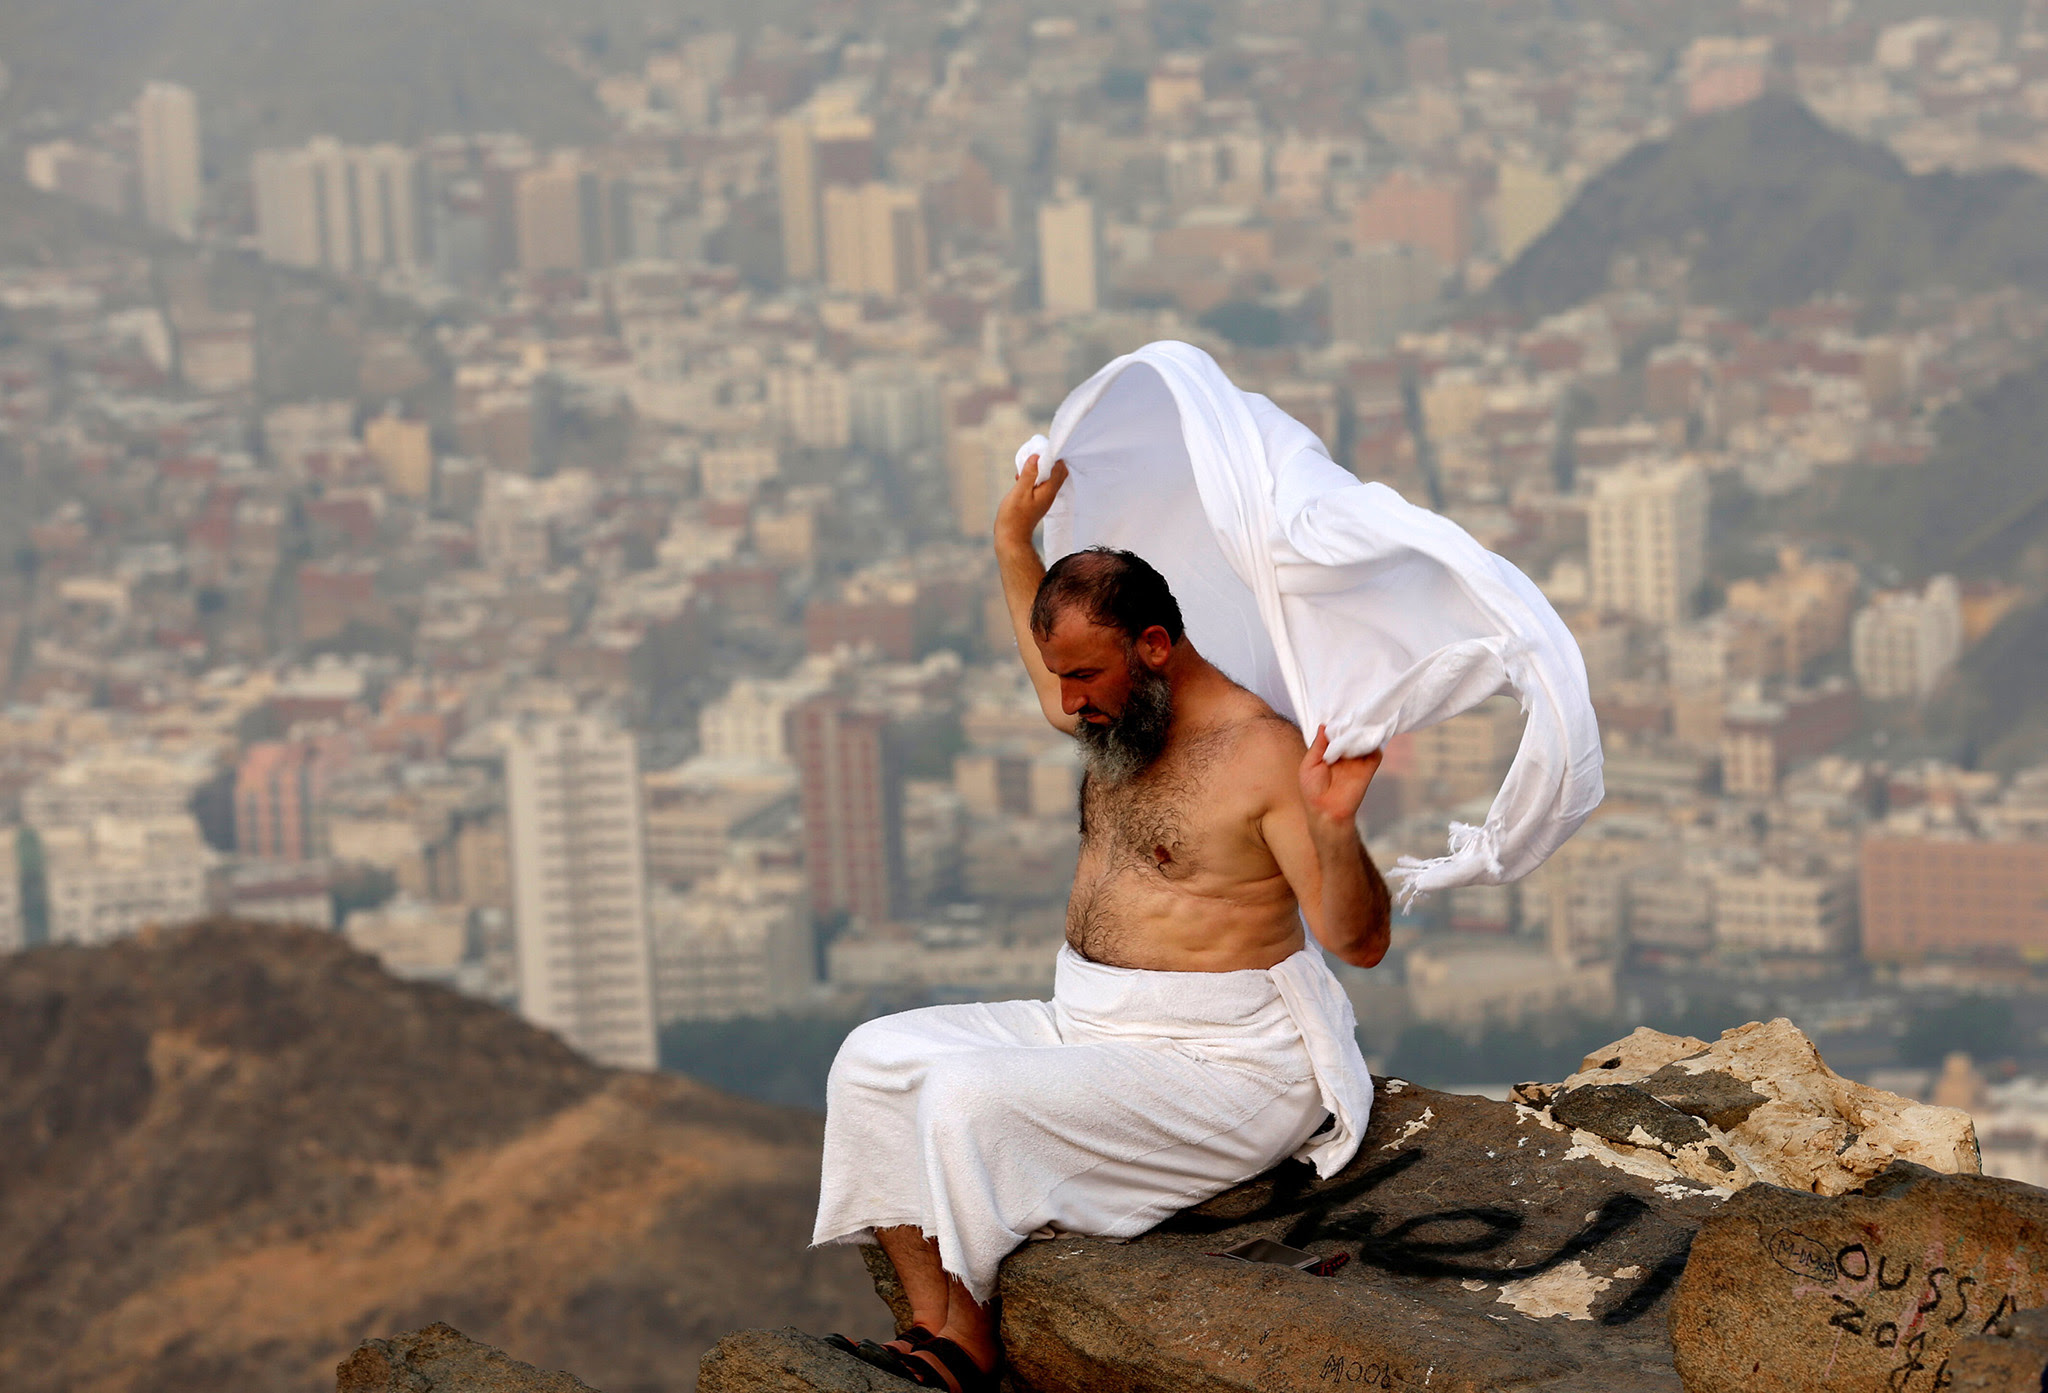 A Muslim pilgrim sits on the top of Mount Al-Noor, where Muslims believe Prophet Mohammad received the first words of the Koran through Gabriel in the Hera cave, ahead of the annual haj pilgrimage in the holy city of Mecca, Saudi Arabia September 7, 2016. REUTERS/Ahmed Jadallah